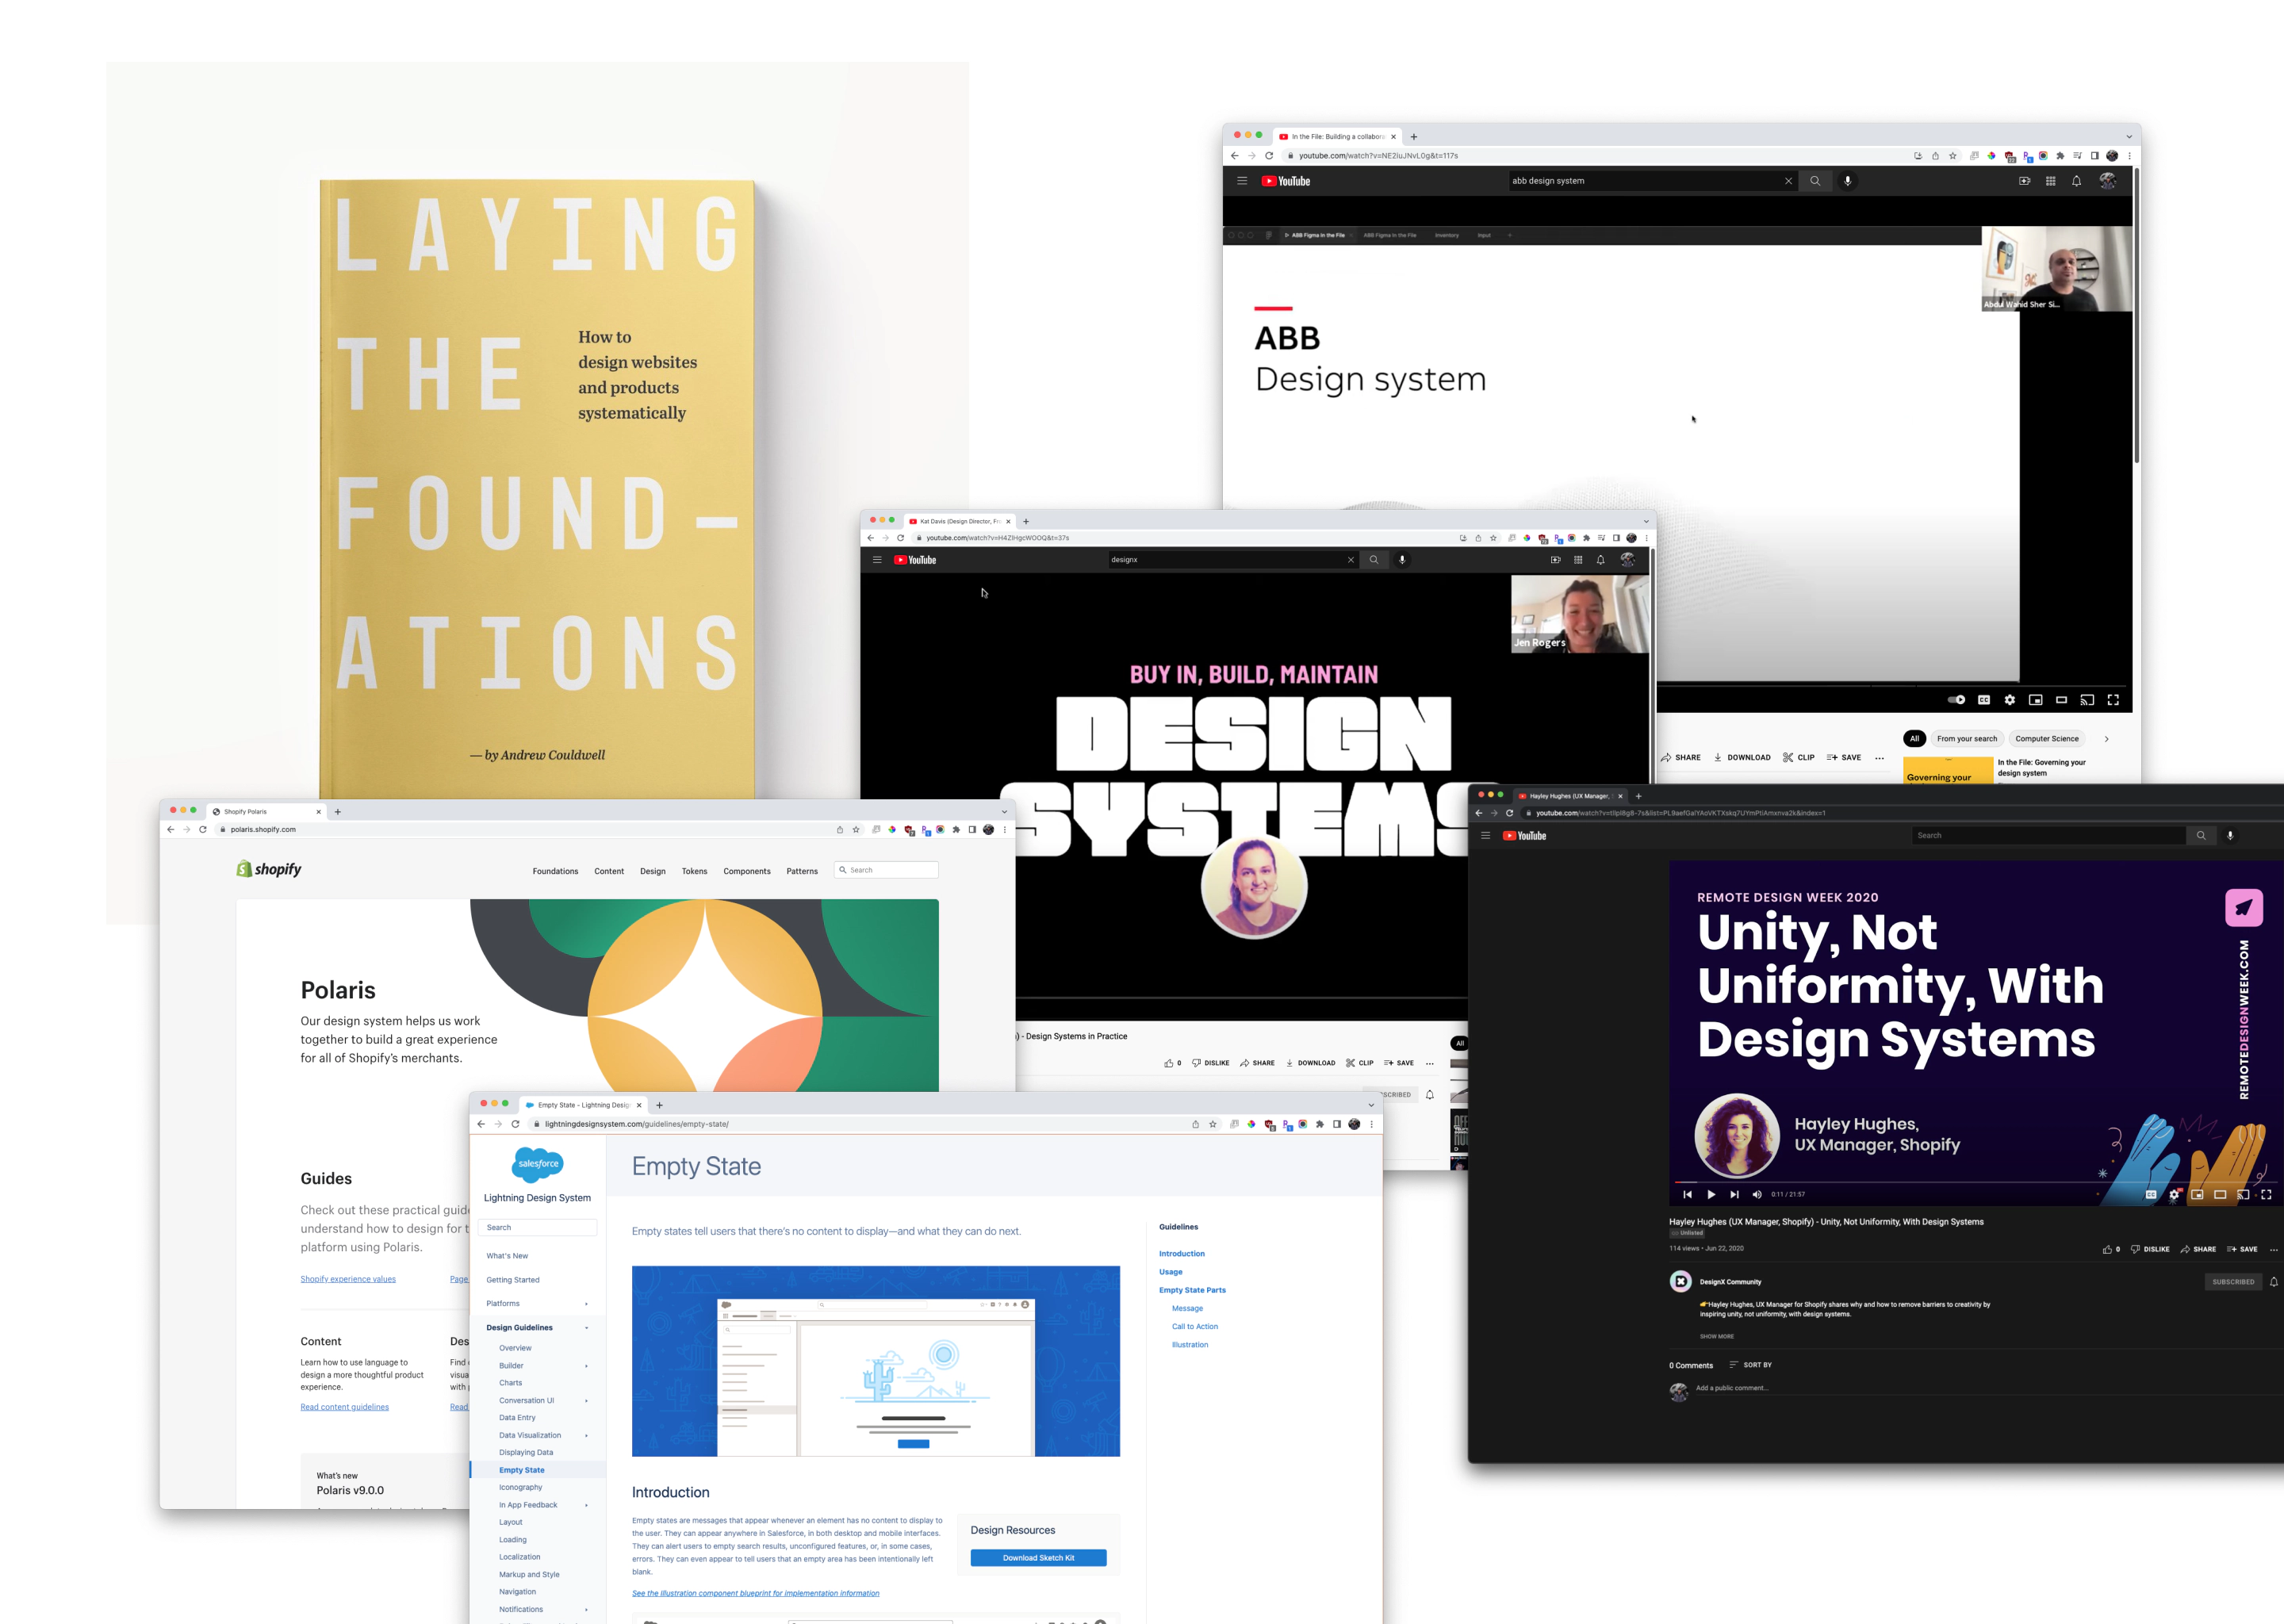 Image of references, such as videos, design system websites, and books.